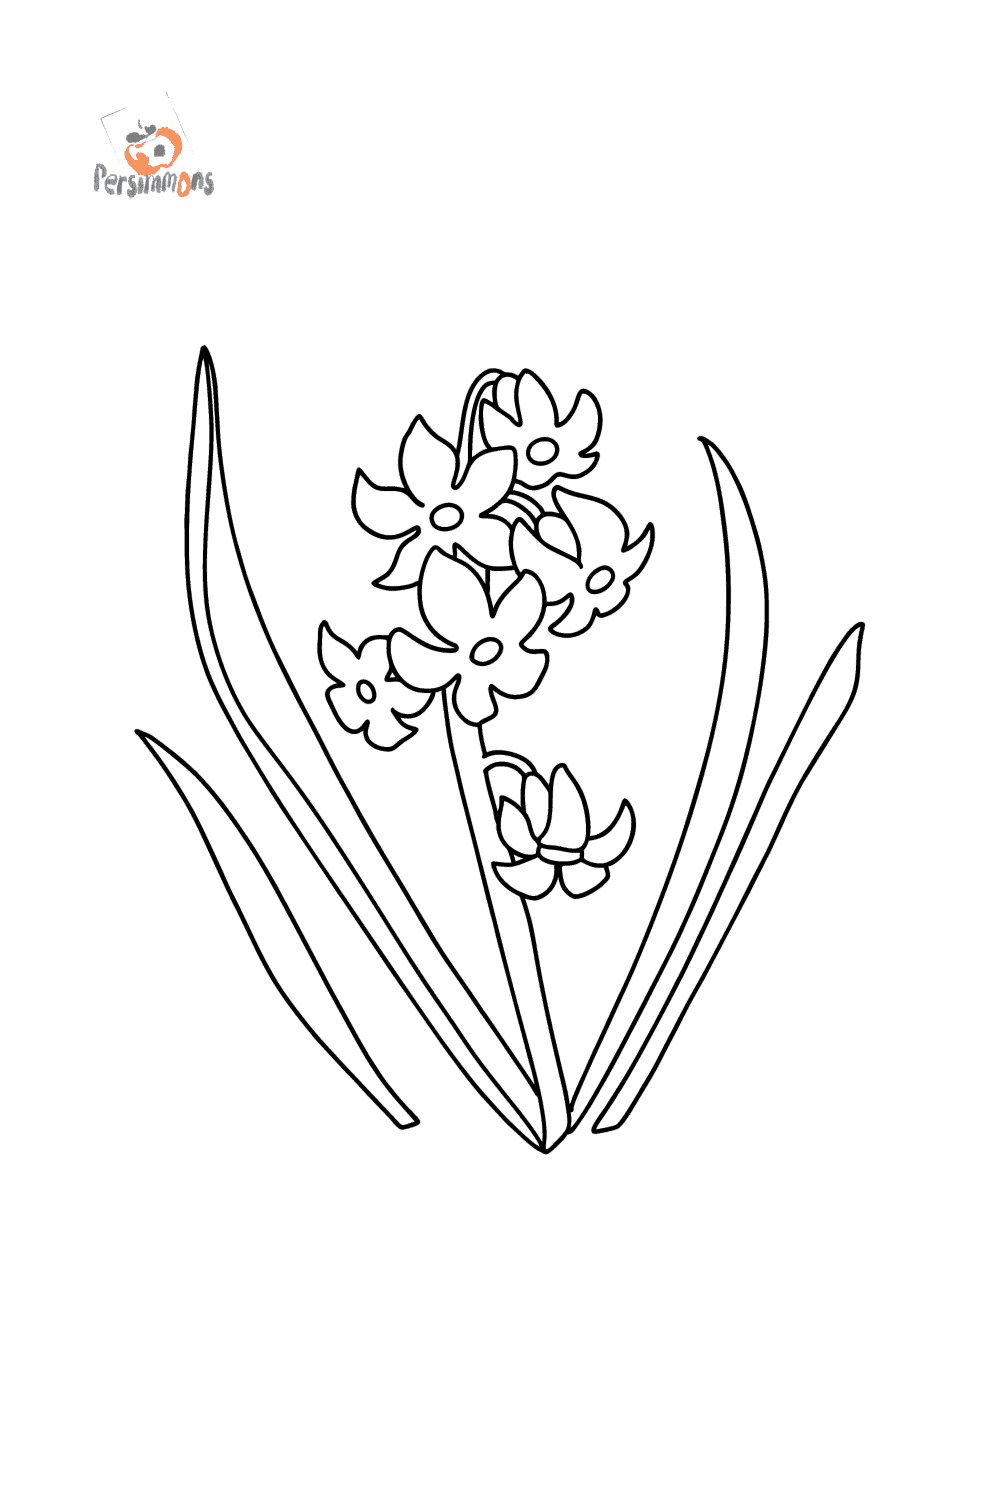 Blue Hyacinths - Flowers Coloring Pages for Adults Online